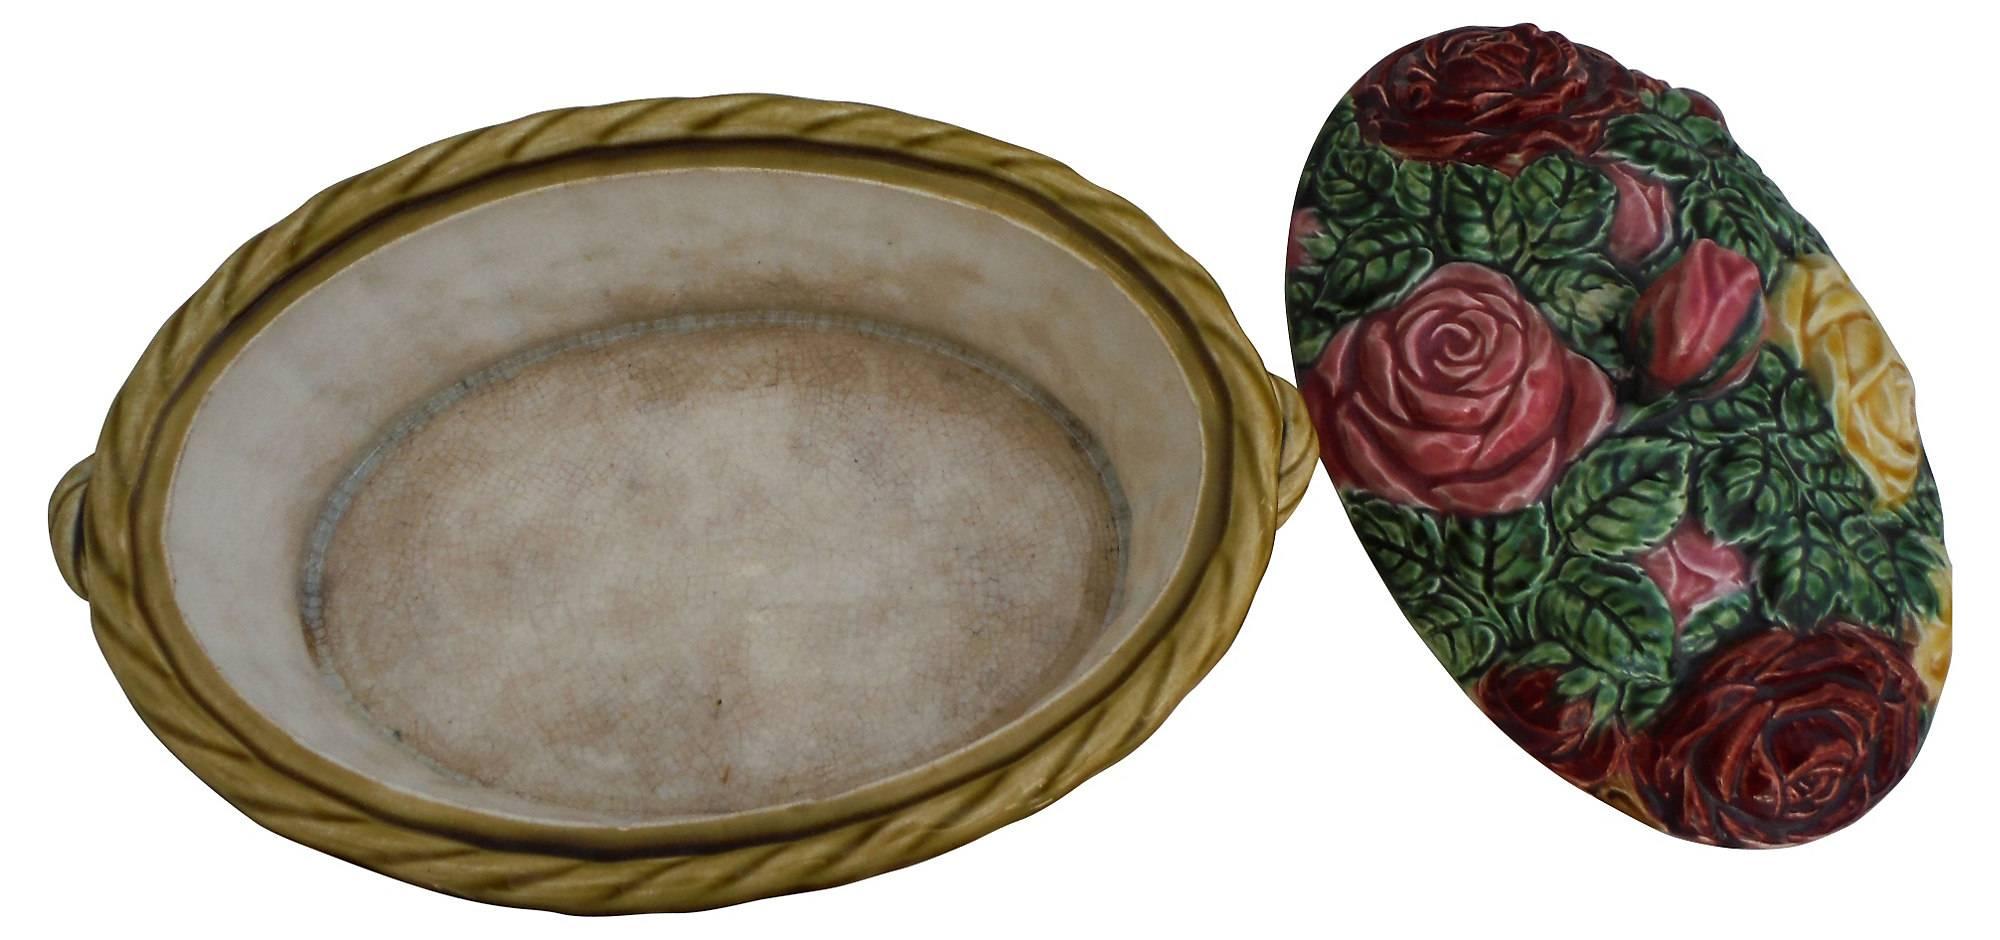 French Provincial French Majolica Roses Basket Sarreguemines